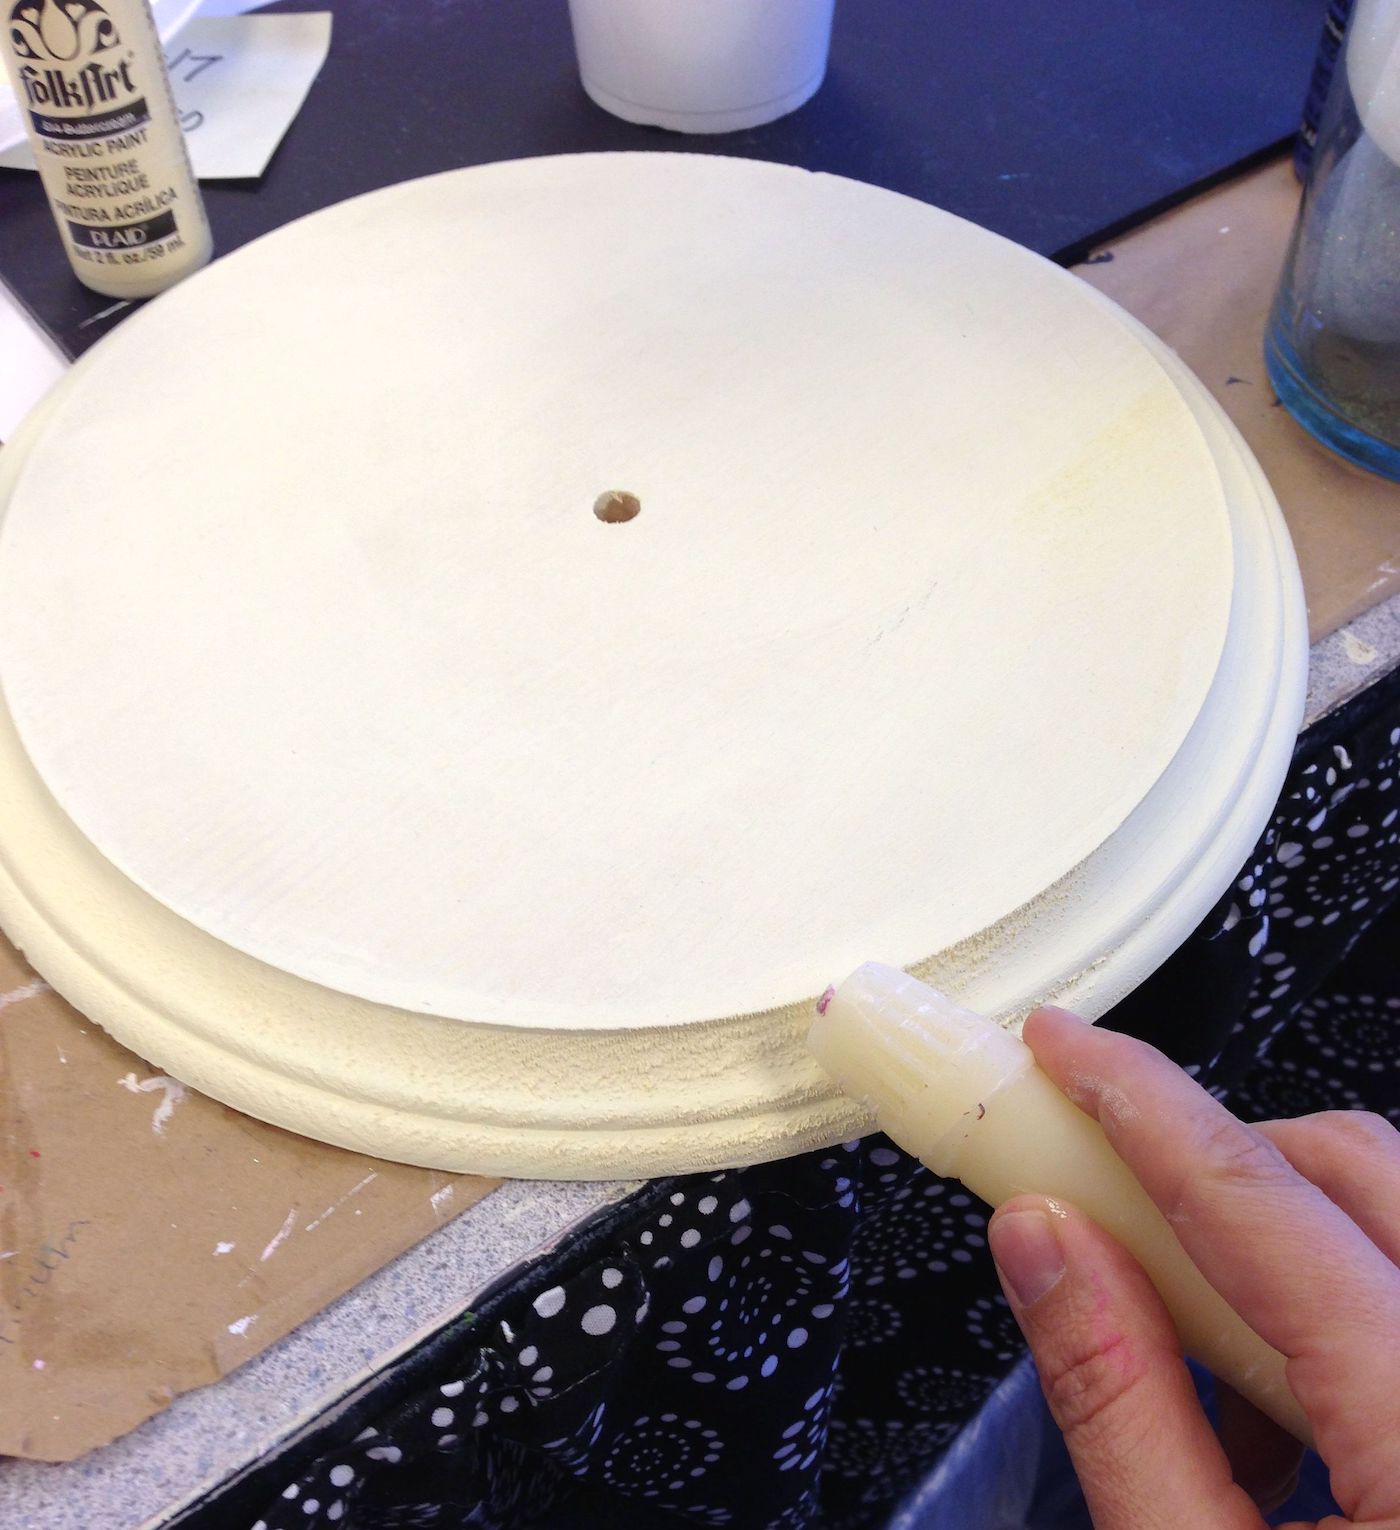 Rubbing the edges of the clock with wax